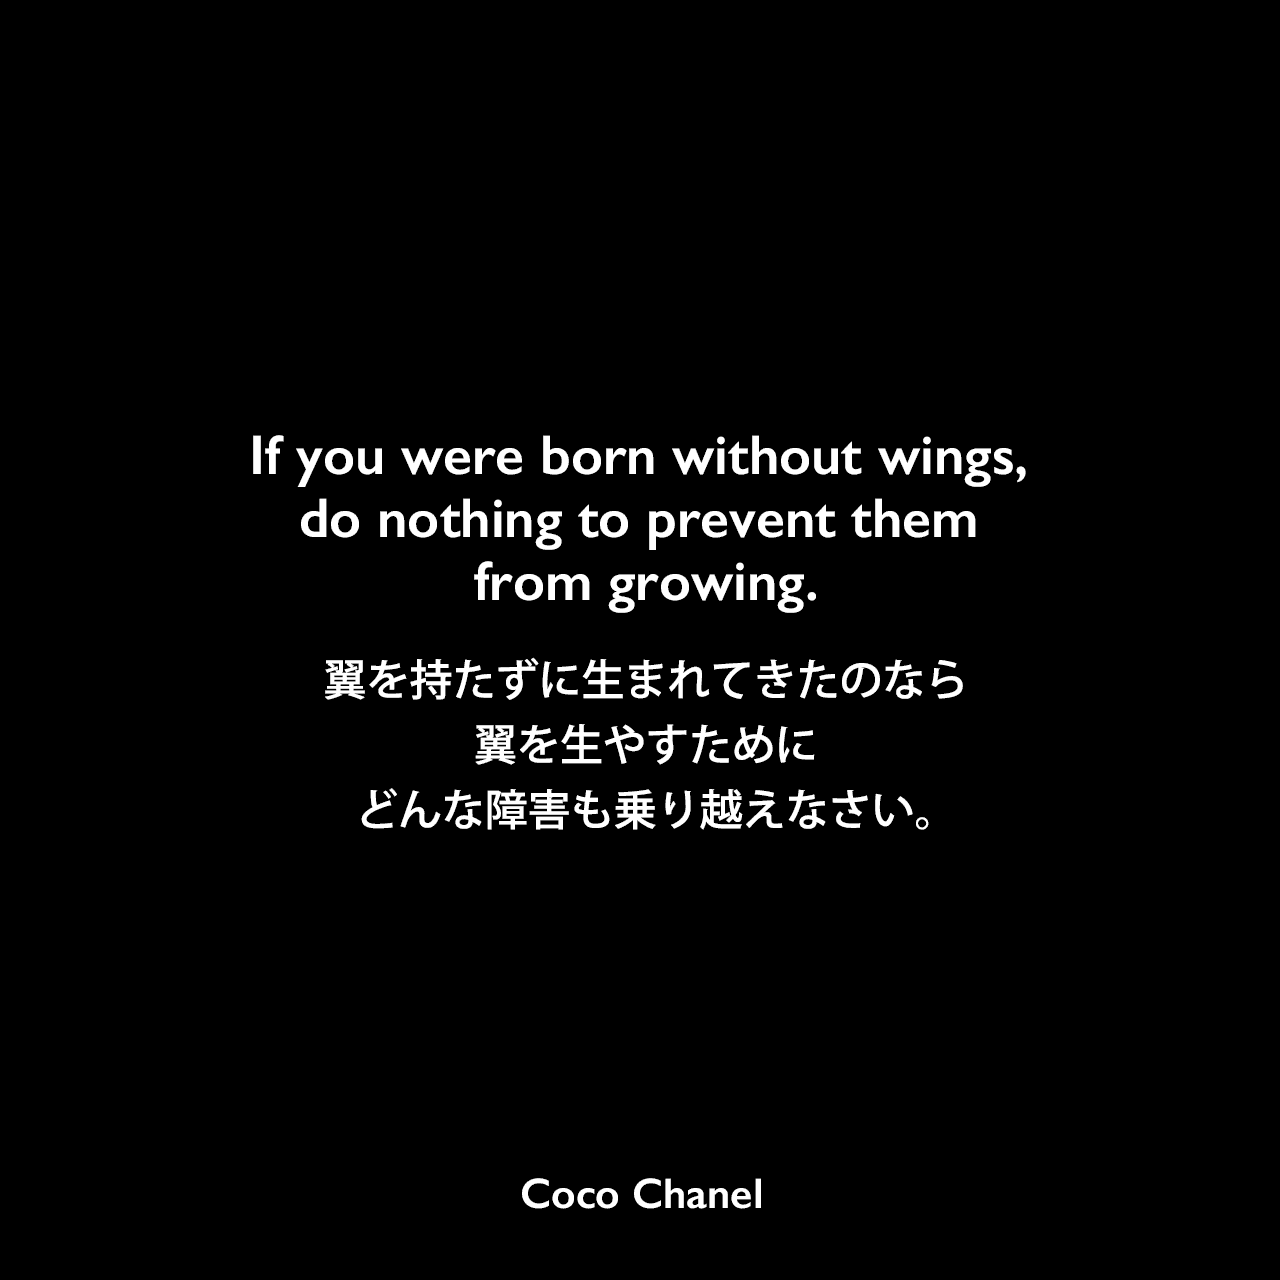 If you were born without wings, do nothing to prevent them from growing.翼を持たずに生まれてきたのなら、翼を生やすために、どんな障害も乗り越えなさい。Coco Chanel